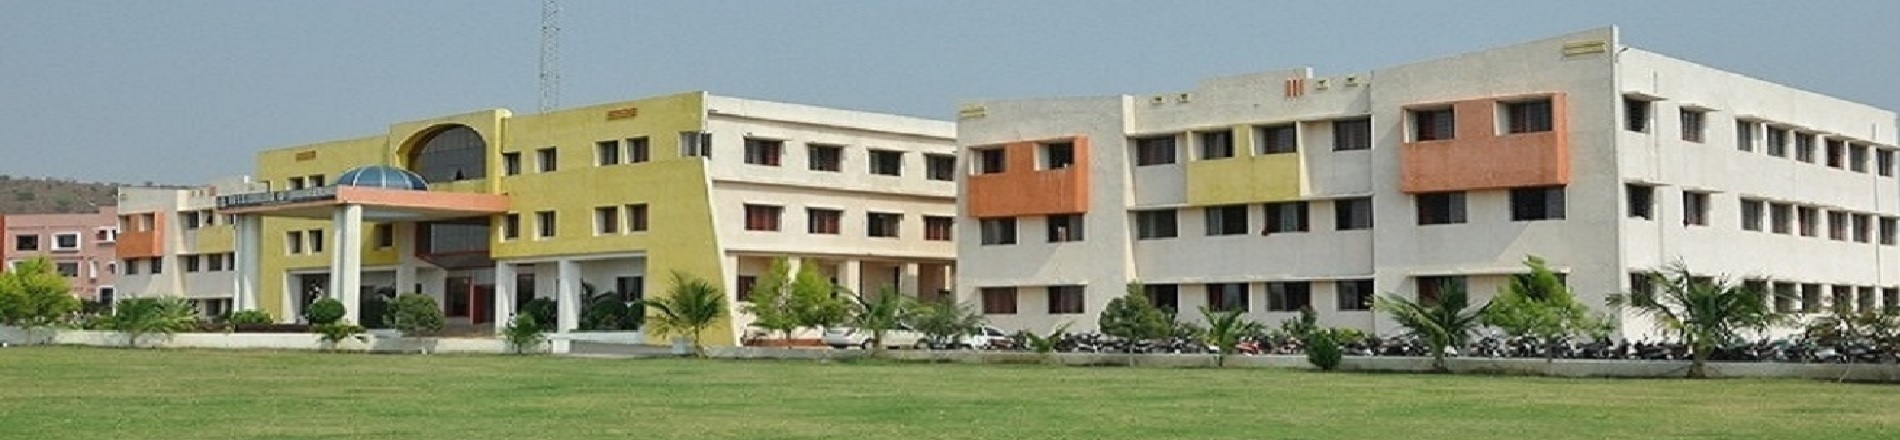 Dr.Rajendra Gode Institute Of Technology And Research, Amravati Image